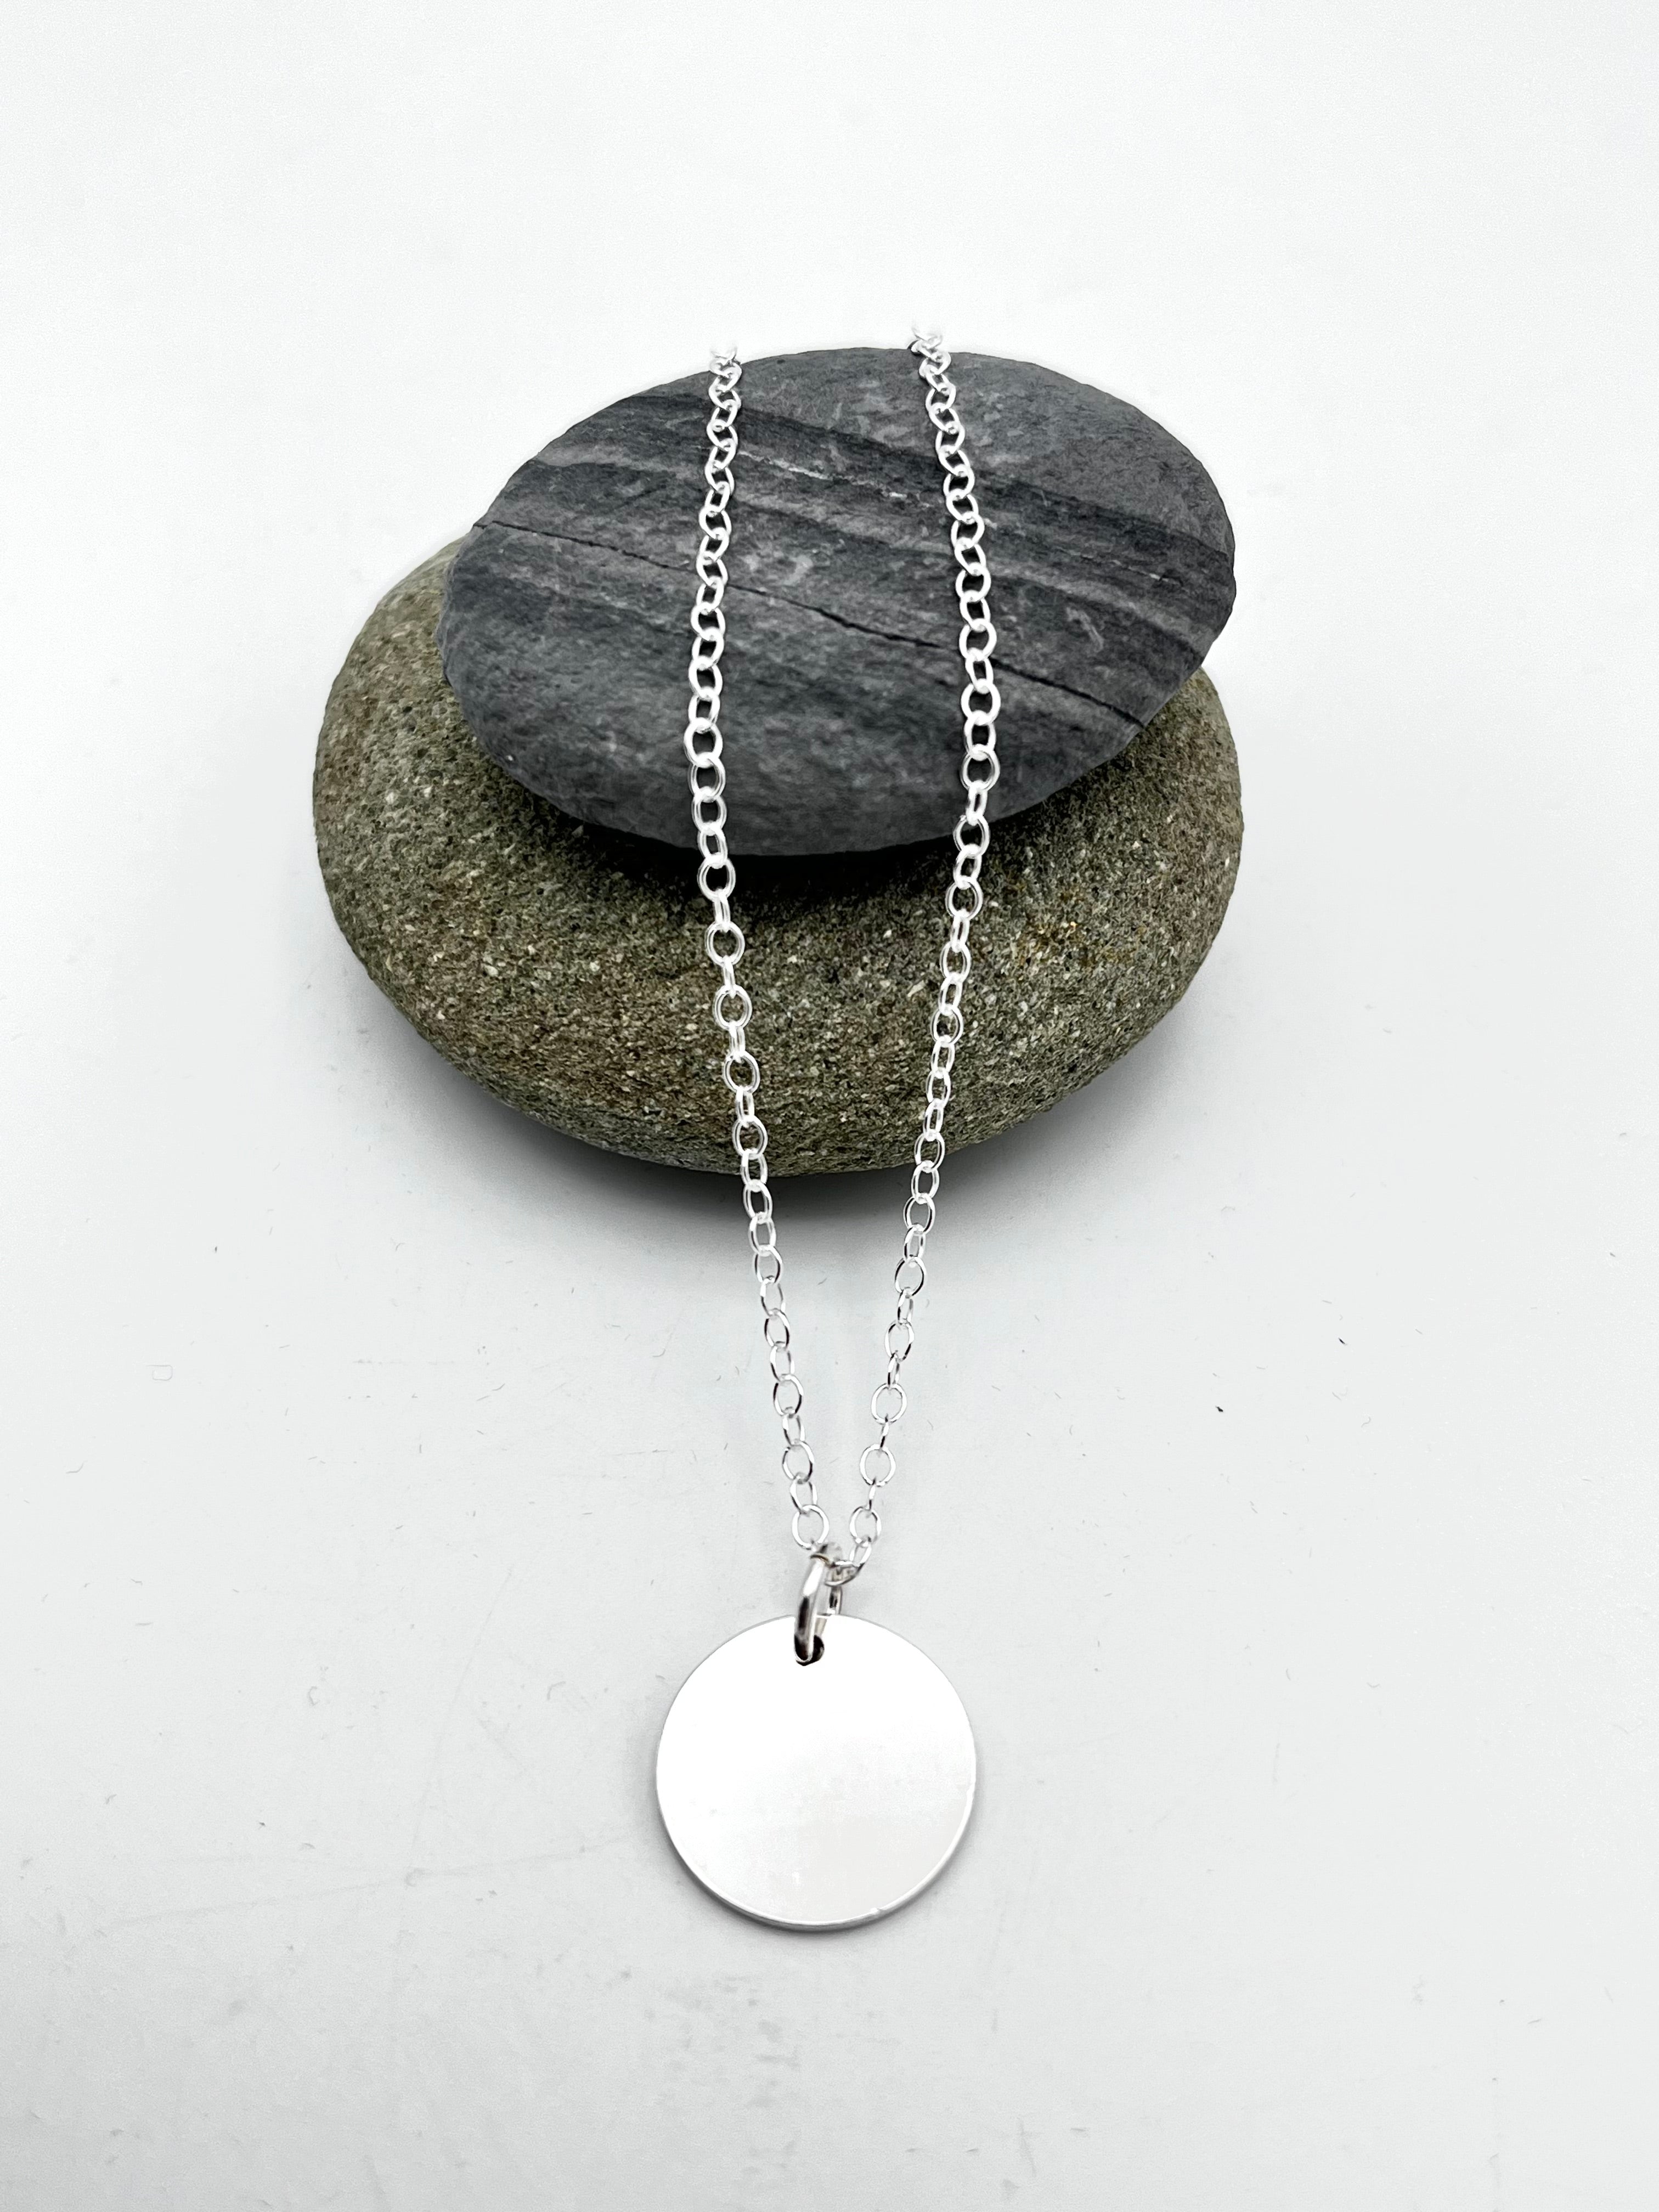 Round disc pendant 15mm diameter polished finish on 16" chain